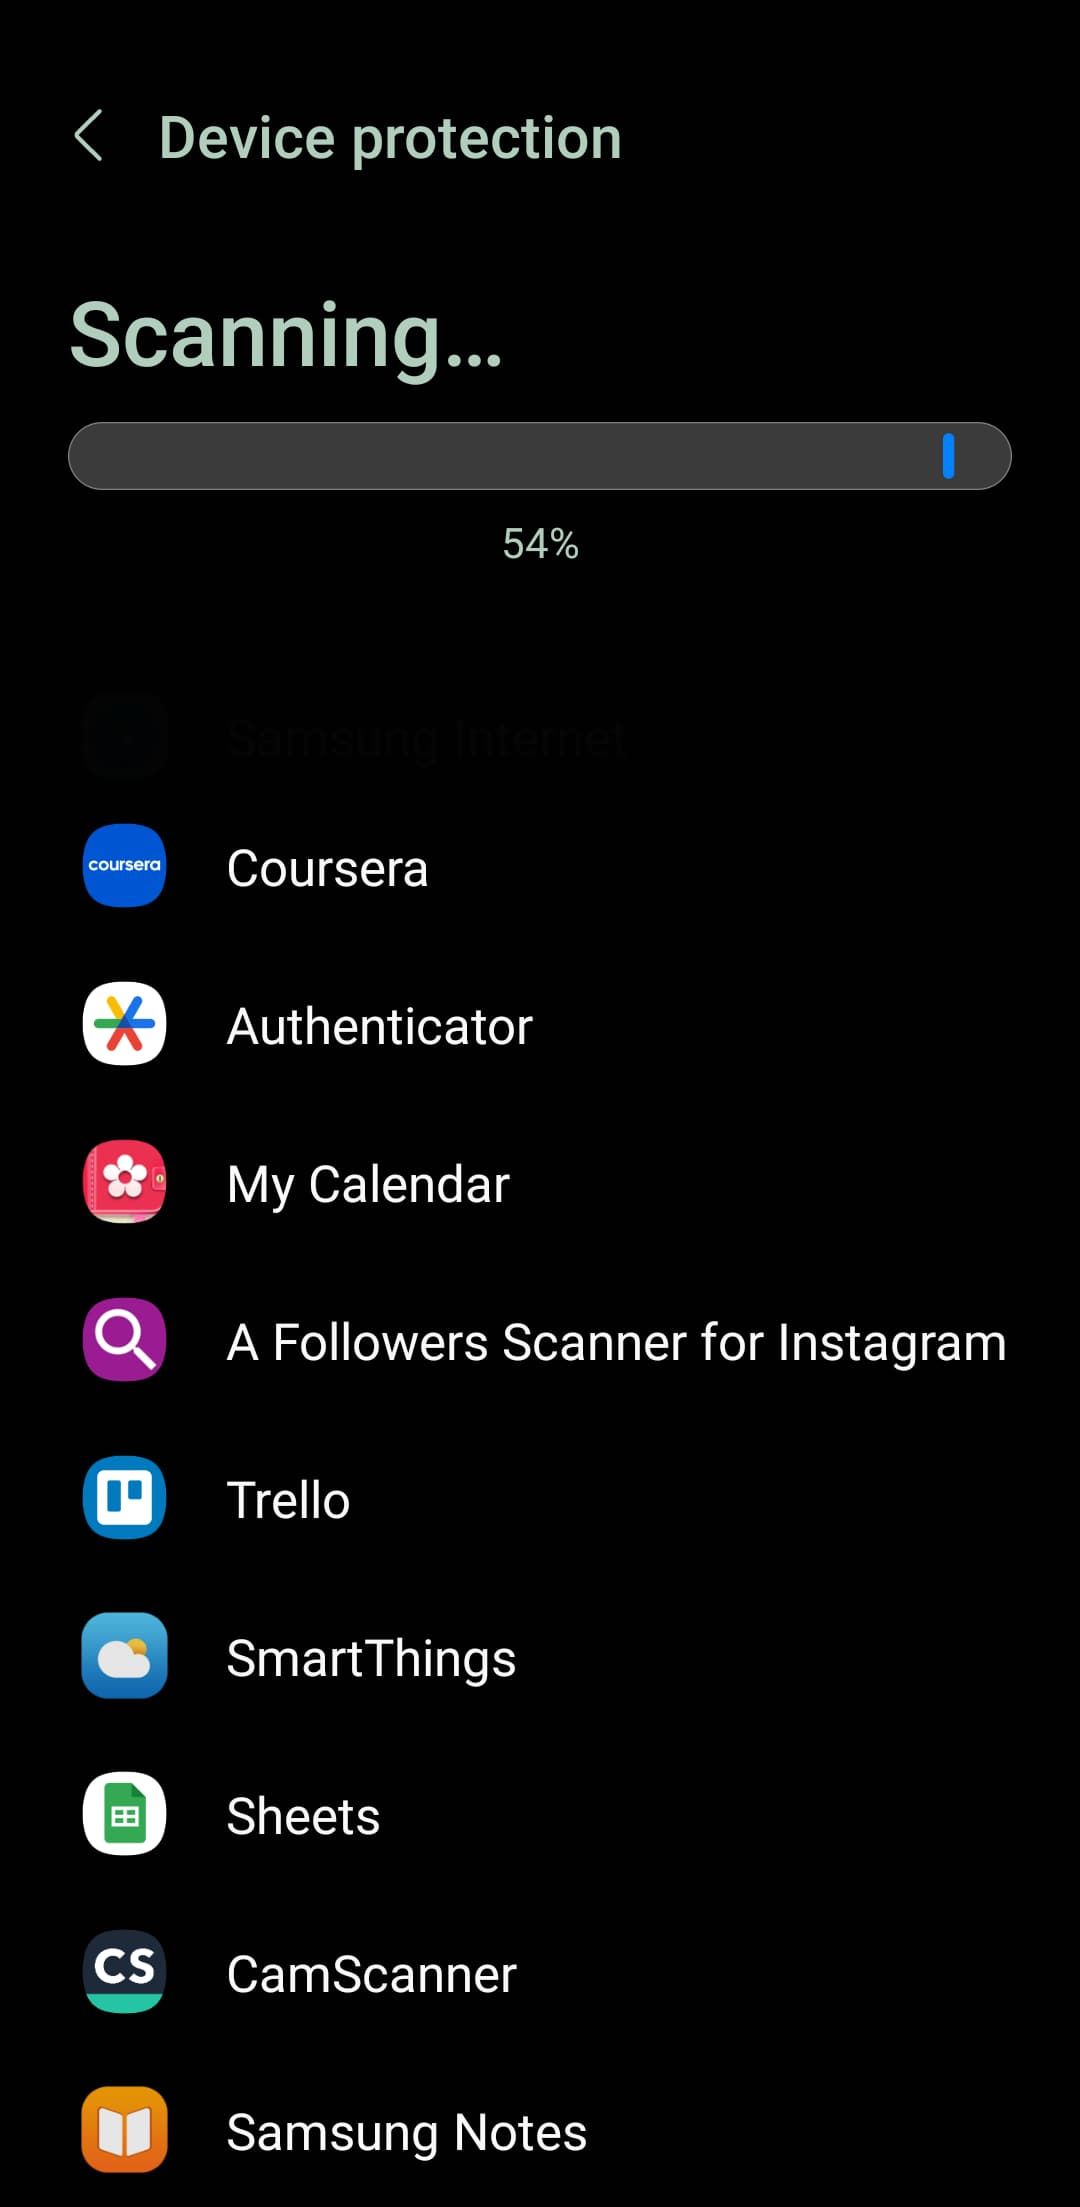 McAfee is scanning apps on Samsung phone for threats